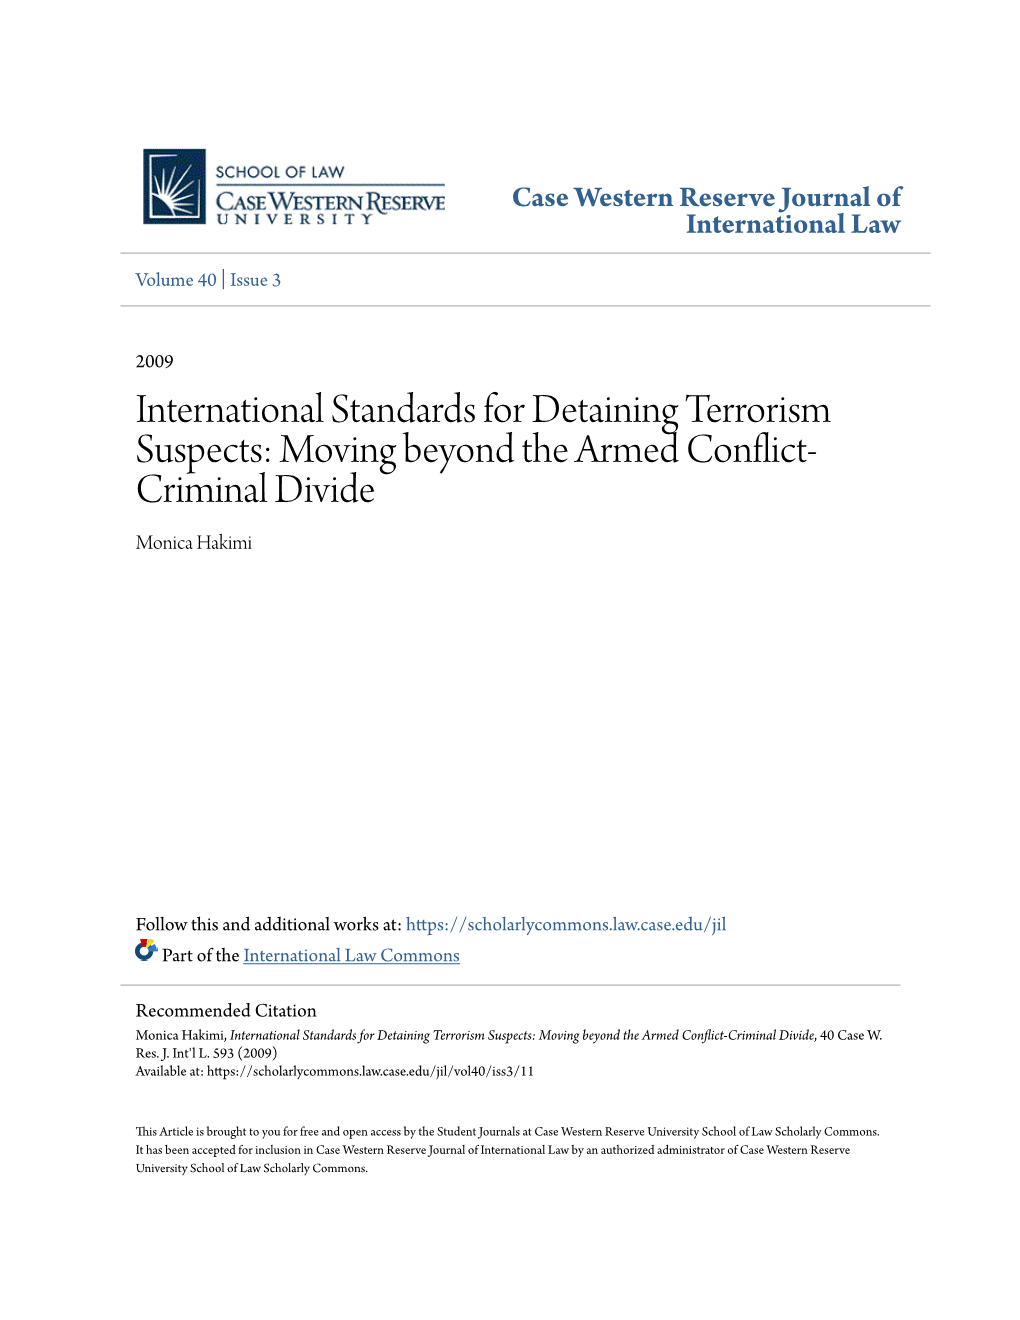 International Standards for Detaining Terrorism Suspects: Moving Beyond the Armed Conflict- Criminal Divide Monica Hakimi